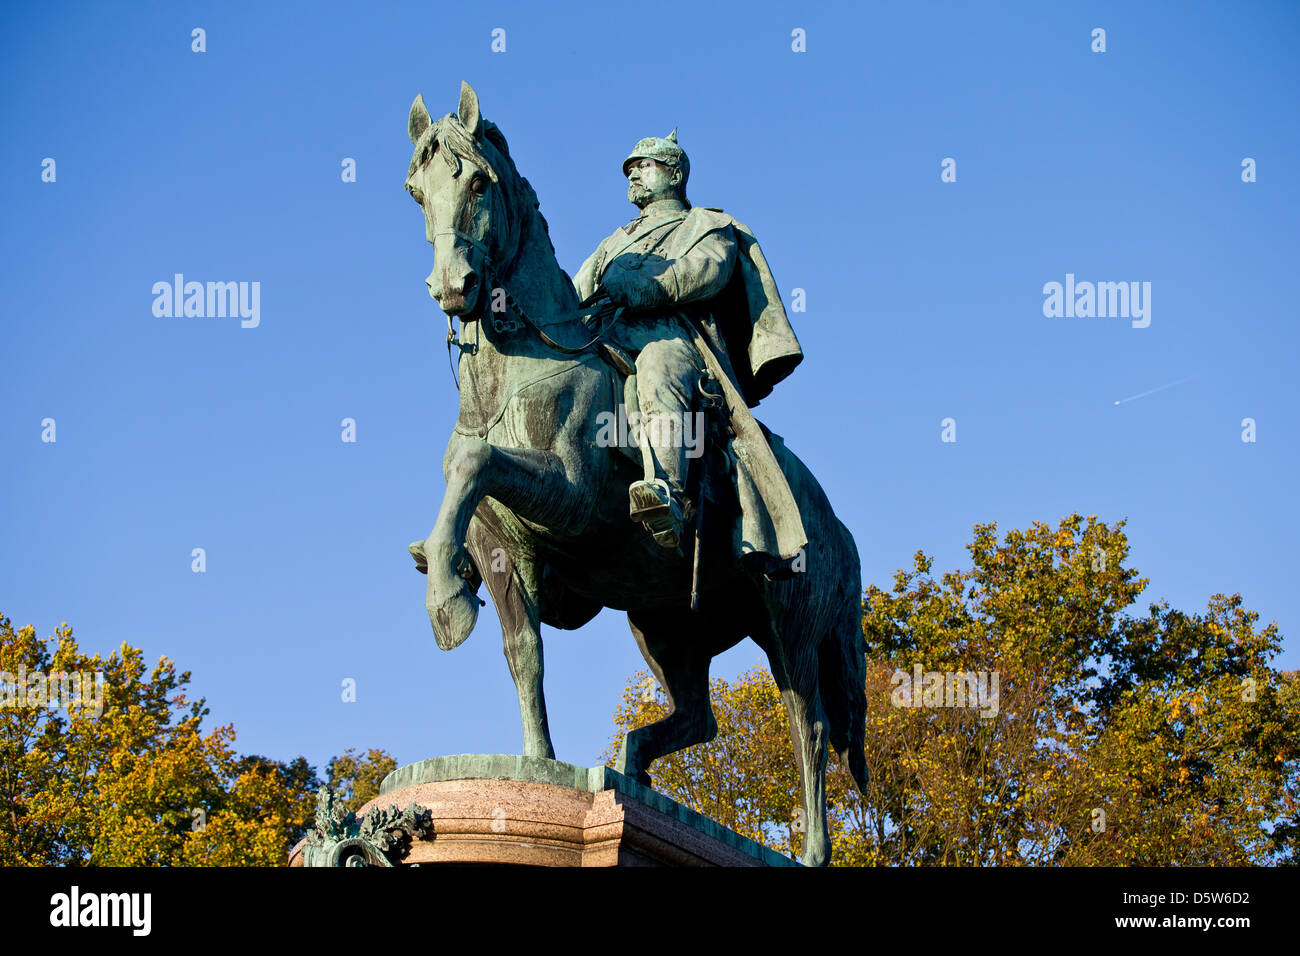 View of the equestrian monument of Ernest II, Duke of Saxe-Coburg and Gotha, at the palace gardens in Coburg, Germany, 02 October 2012. Photo: Daniel Karmann Stock Photo